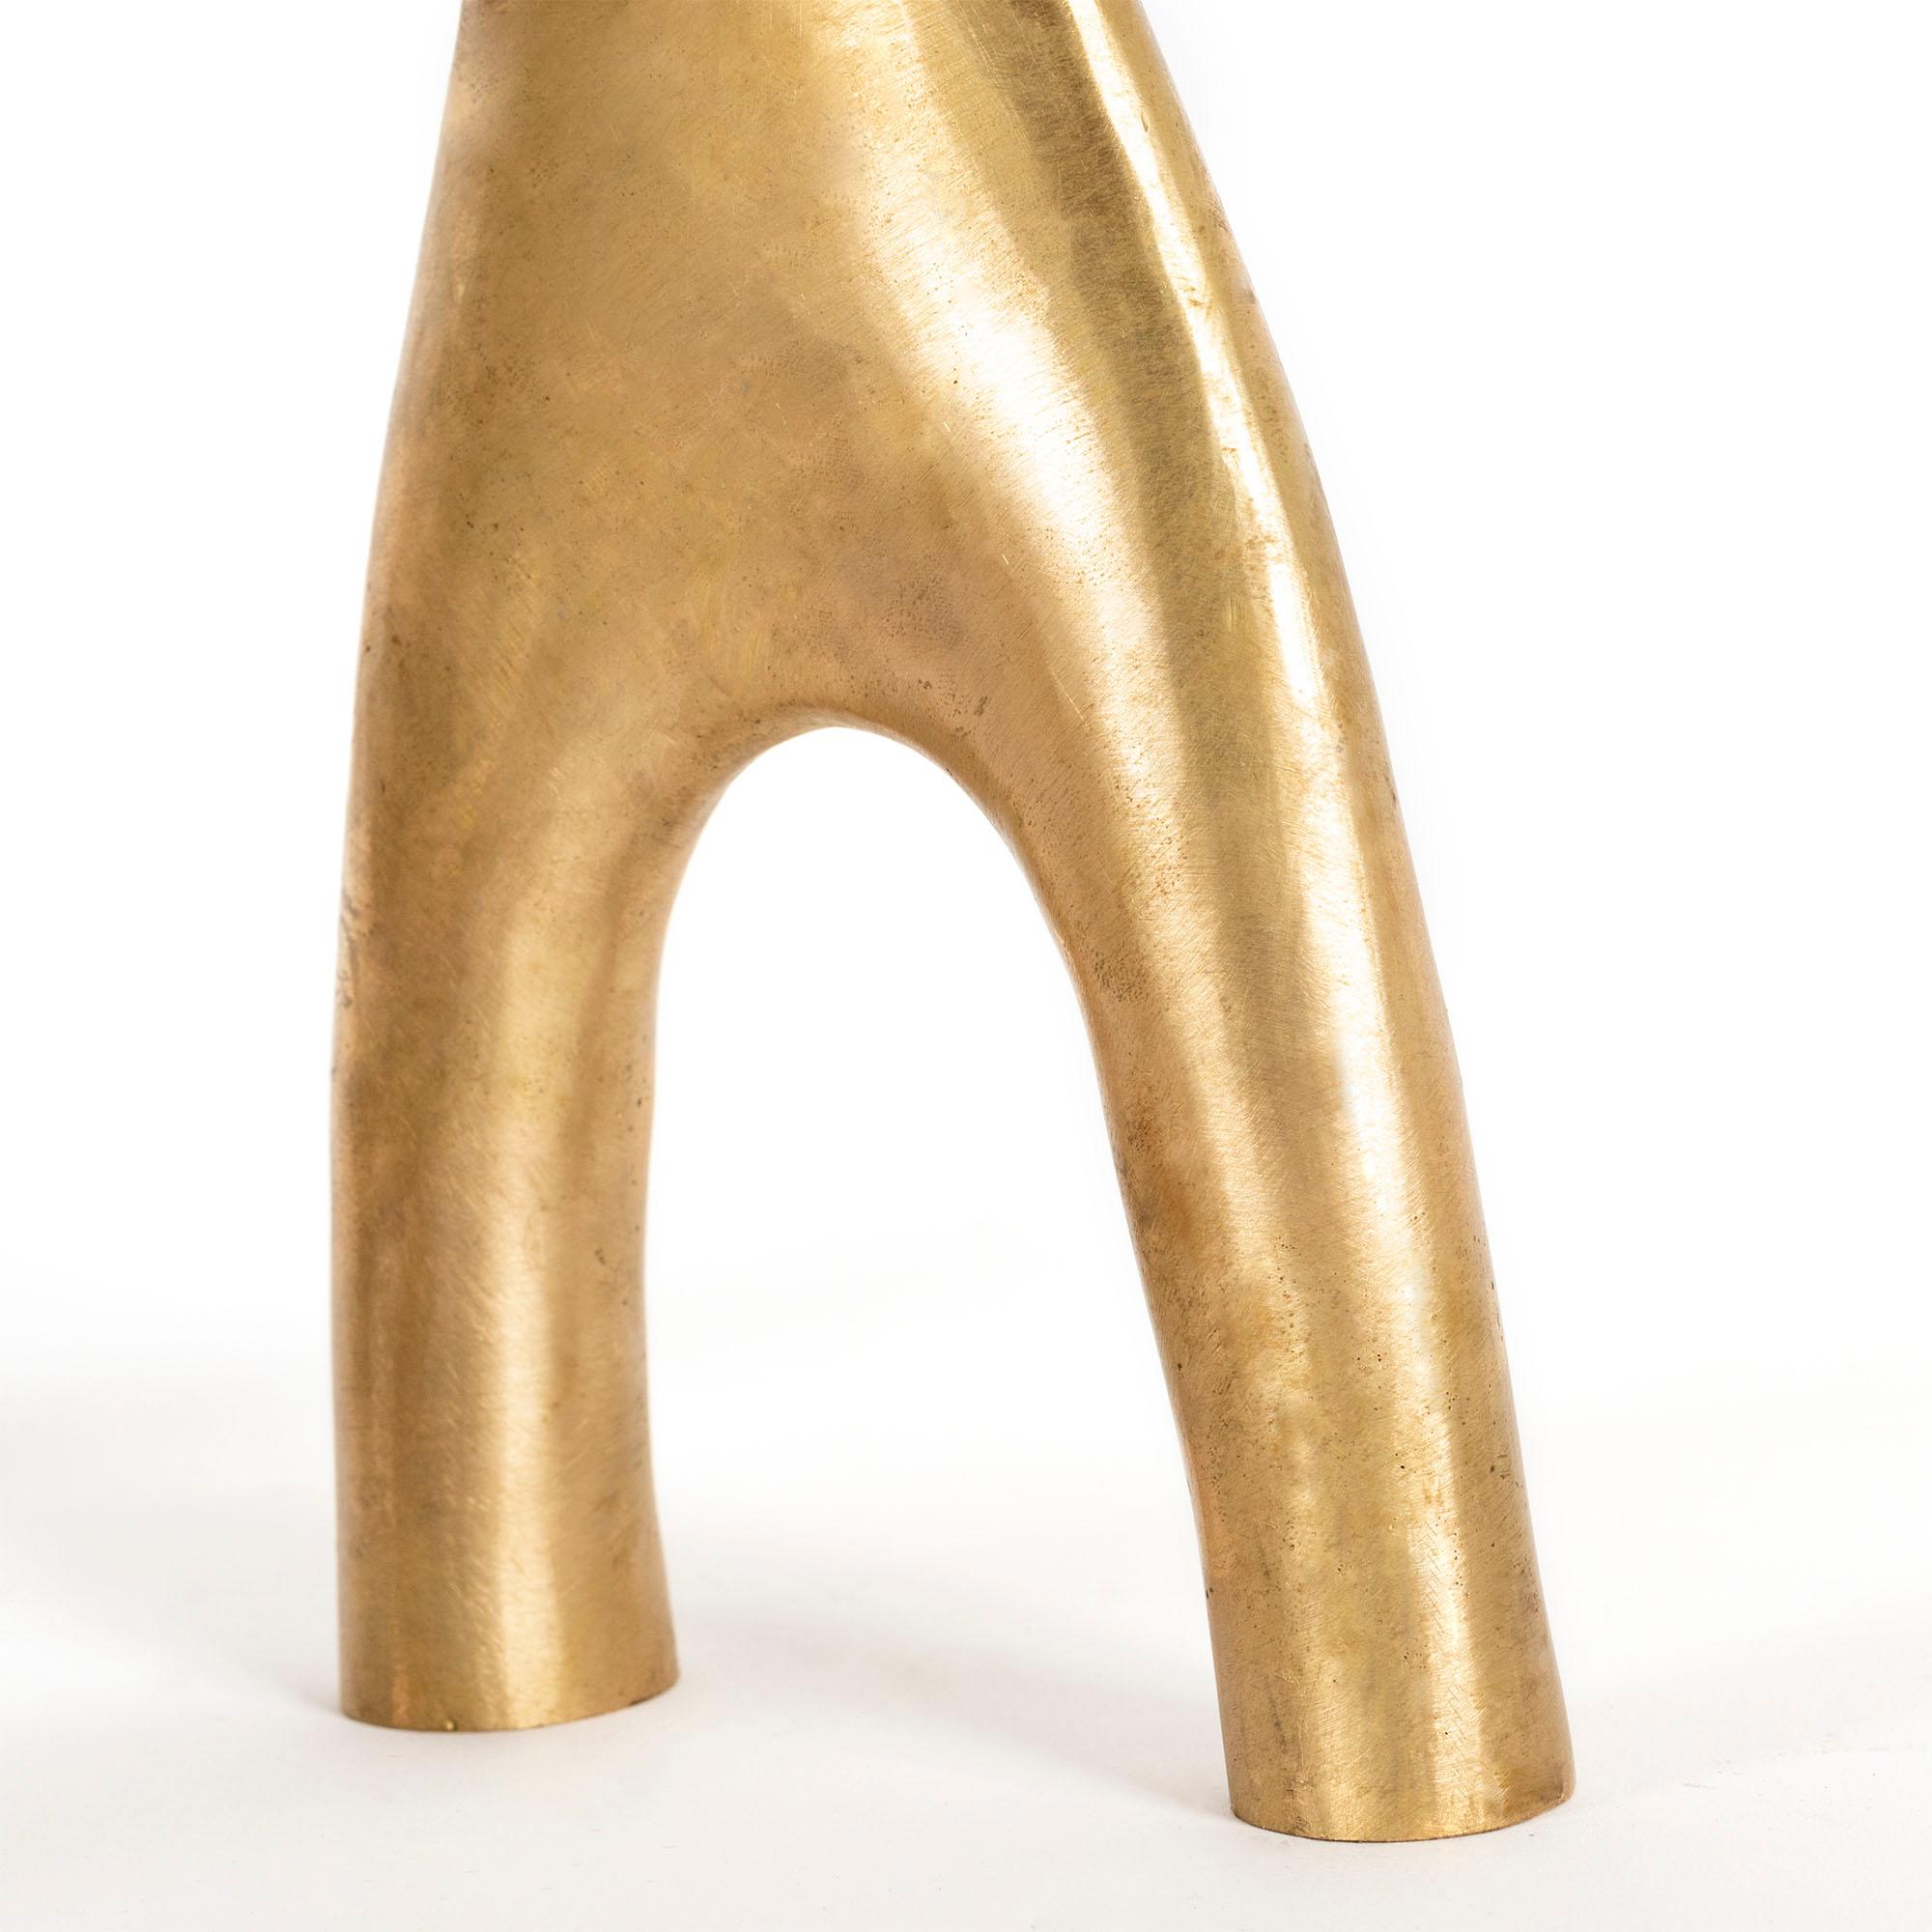 Contemporary Bronze Lobi Candleholders by Pia Chevalier and Ambre Jarno